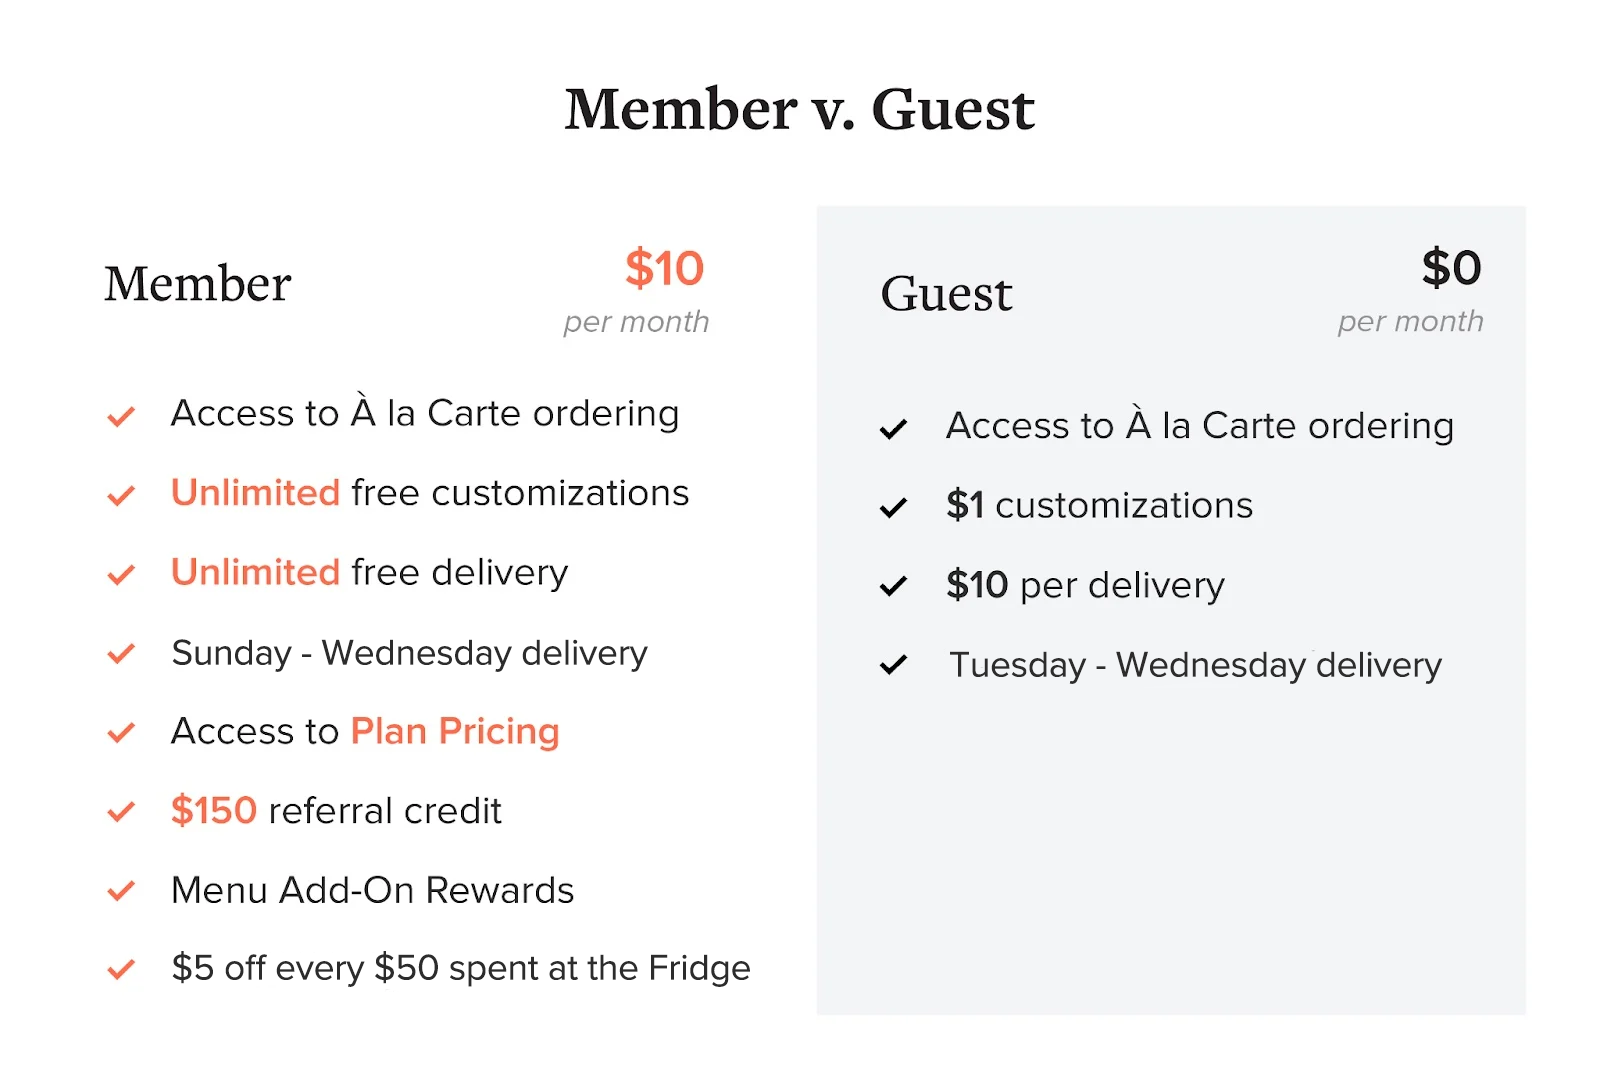 Member access to À la Carte ordering, unlimited free customizations and deliveries, Sunday - Wednesday delivery, Access to Plan pricing, $150 referral credit, Menu Add-On rewards, $5 off every $50 spent at the Fridge; Guest access to À la Carte ordering, $1 customizations, $10 deliveries, Tuesday - Wednesday delivery